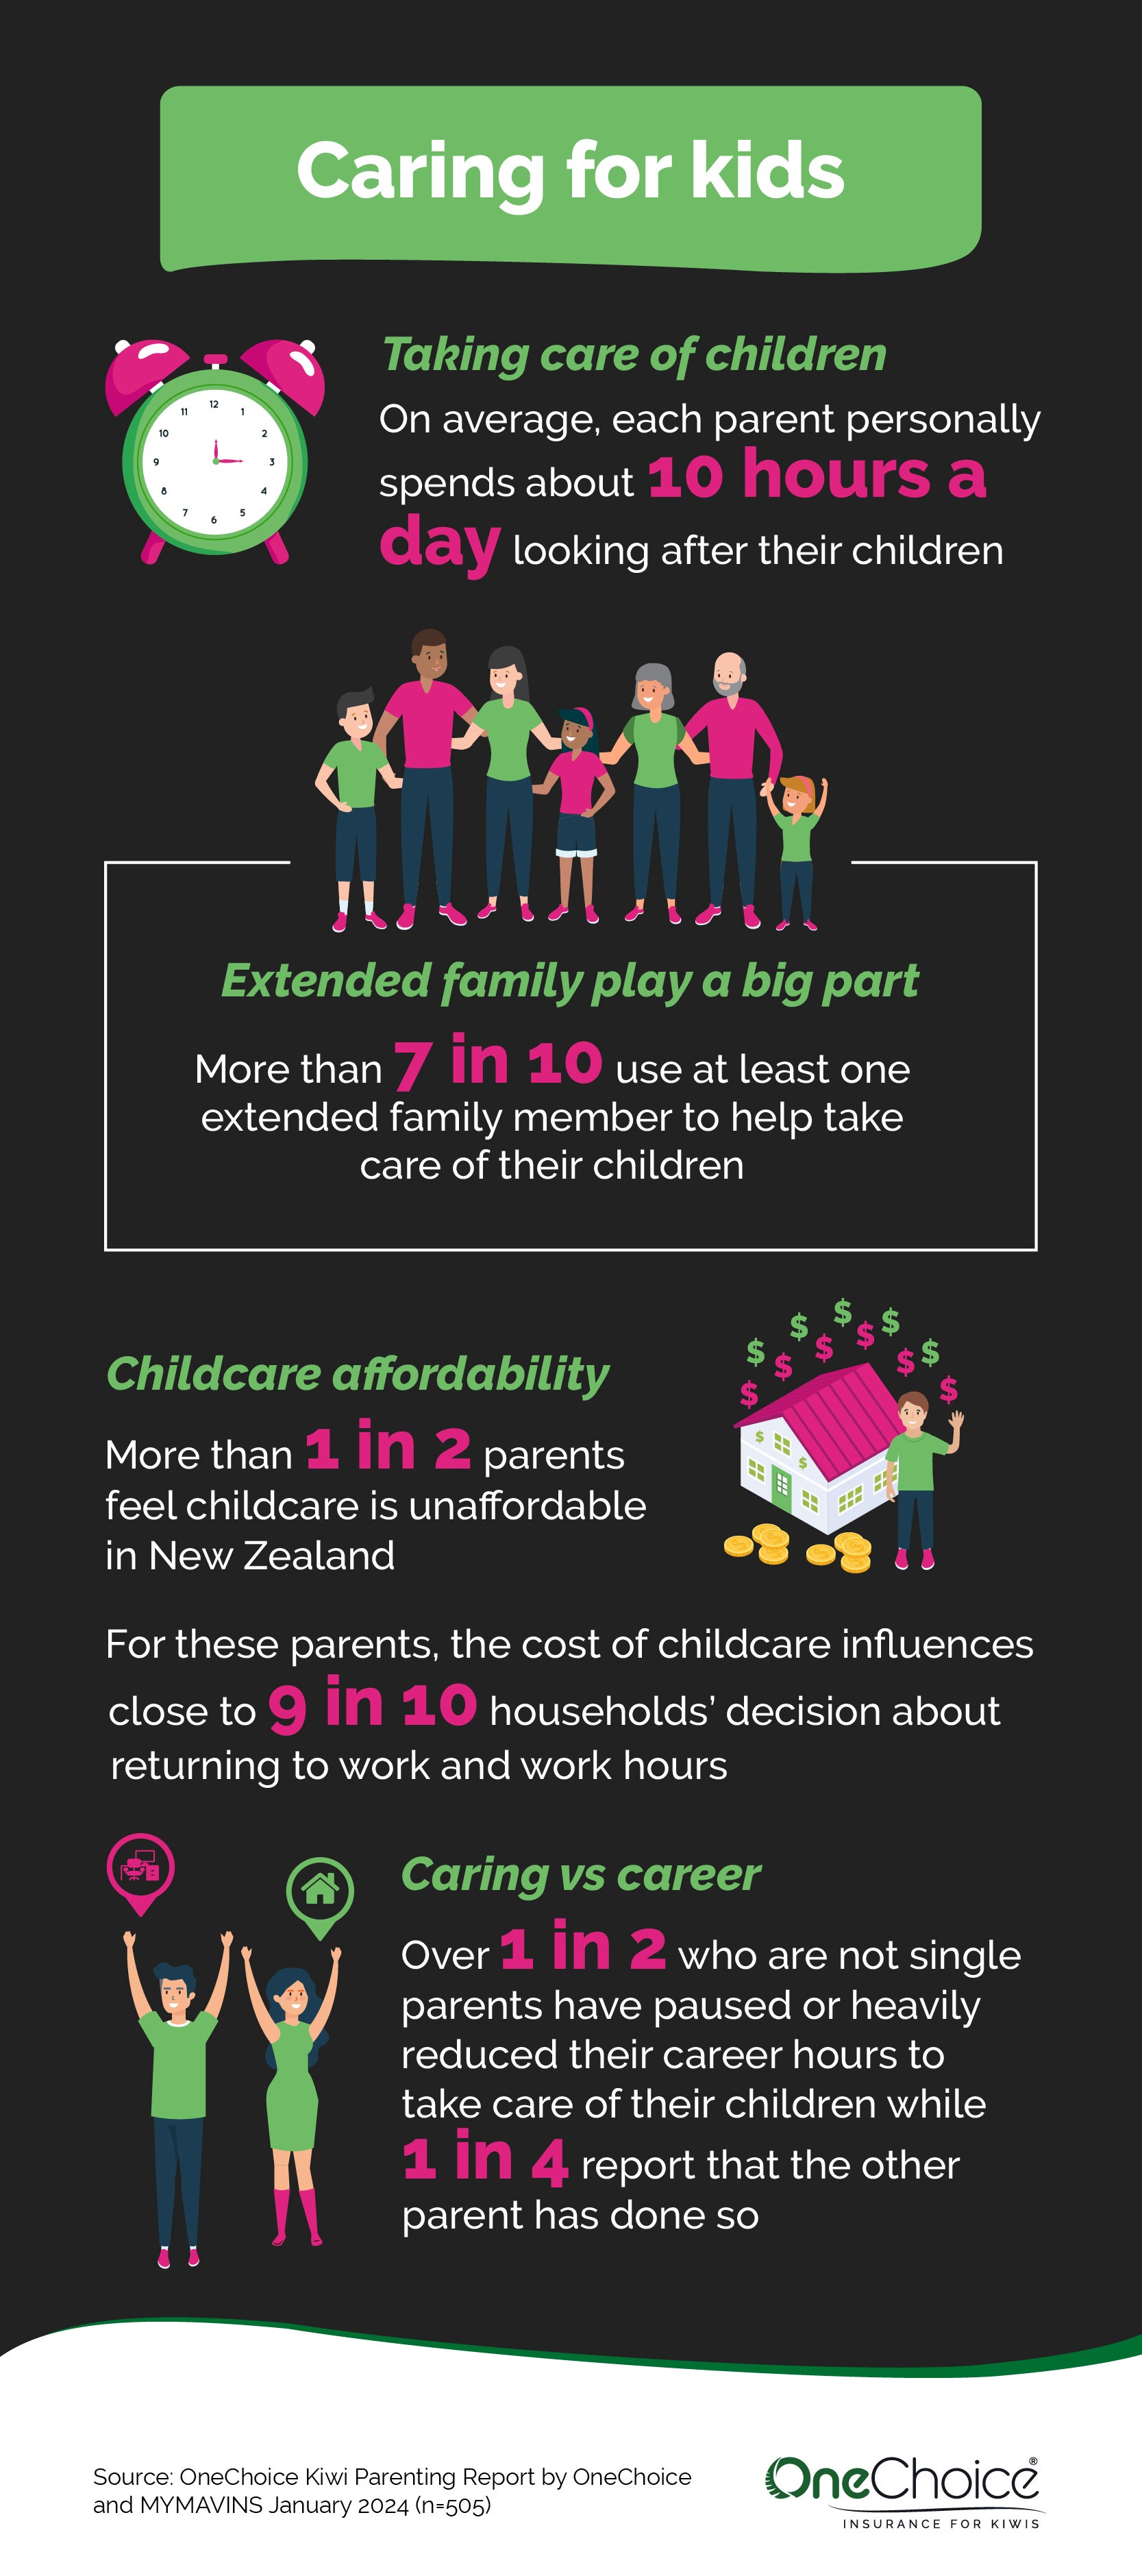 OneChoice Kiwi Parenting Report - caring for kids